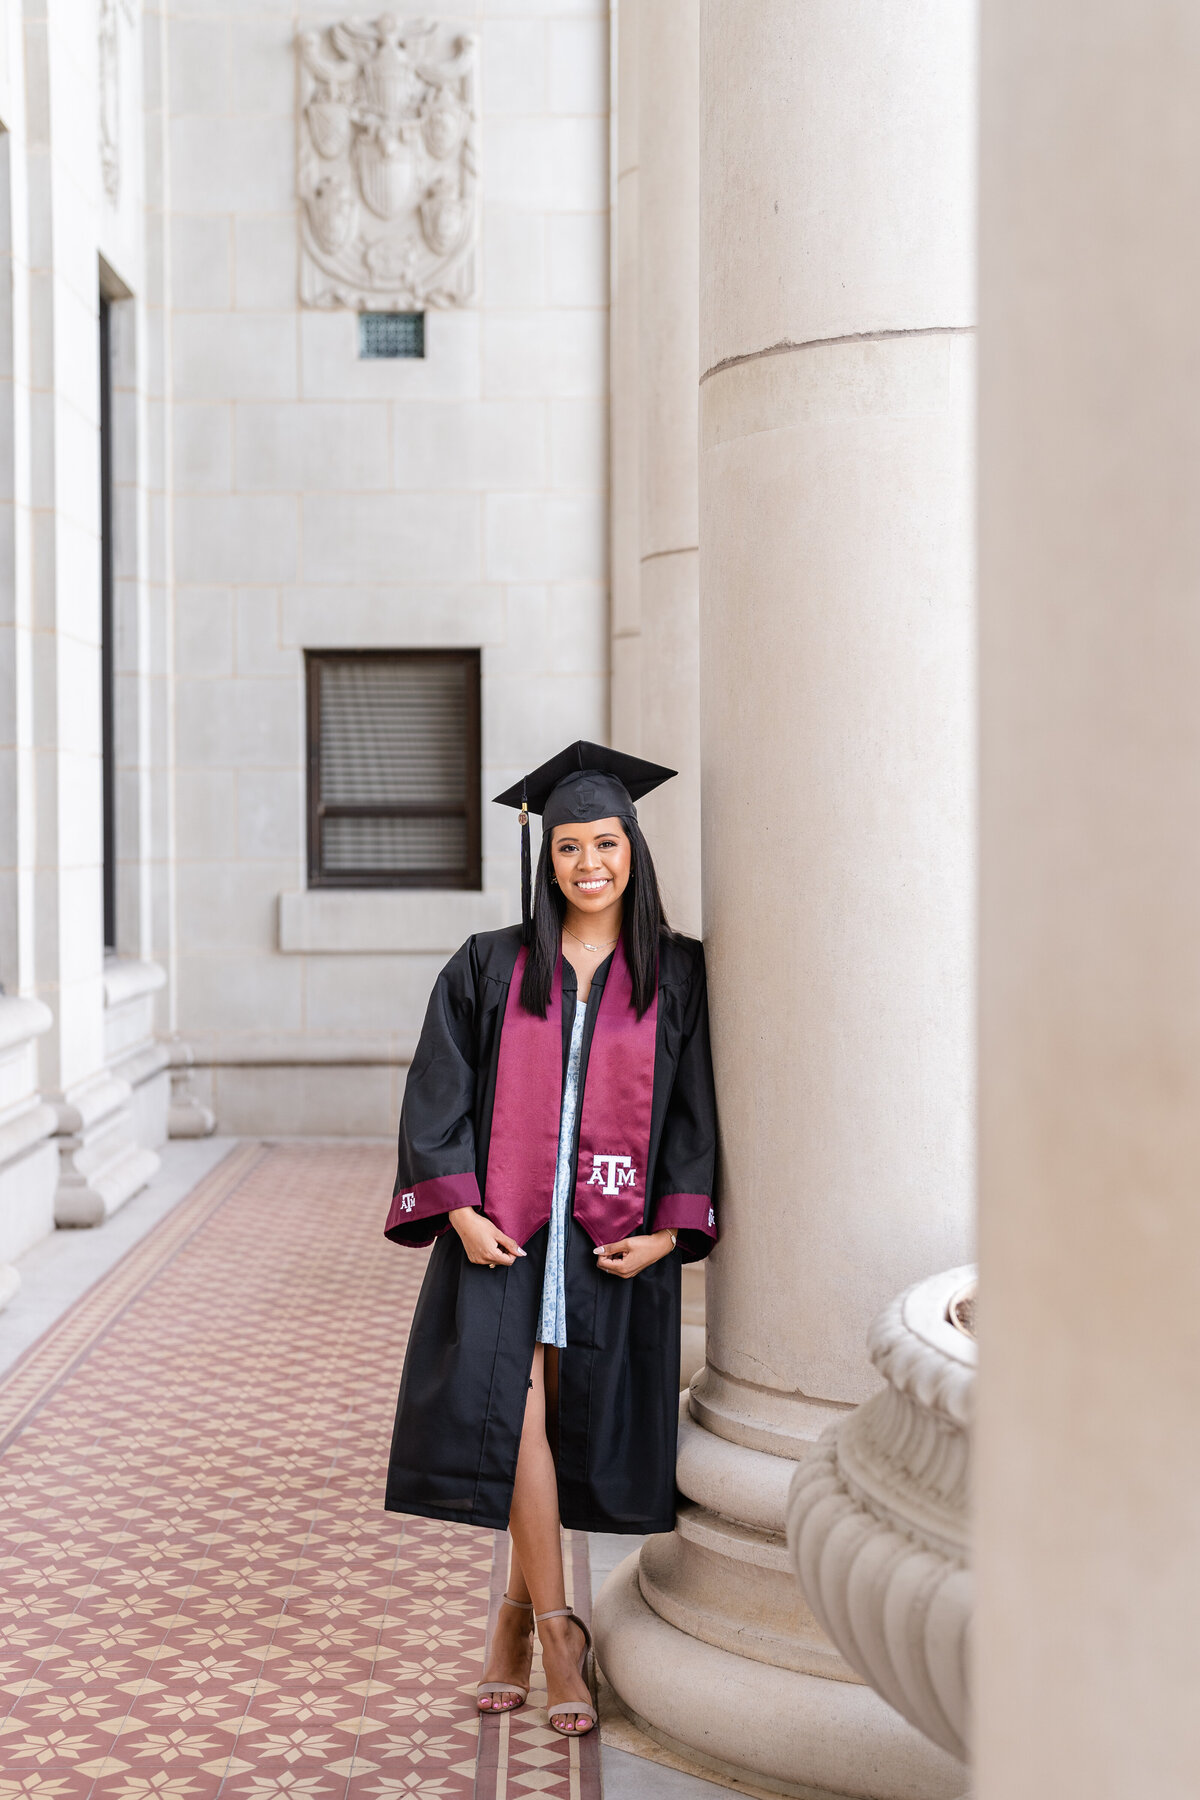 Texas A&M senior girl wearing gown, Aggie stole and cap while holding stole and leaning against column and smiling at the Administration Building